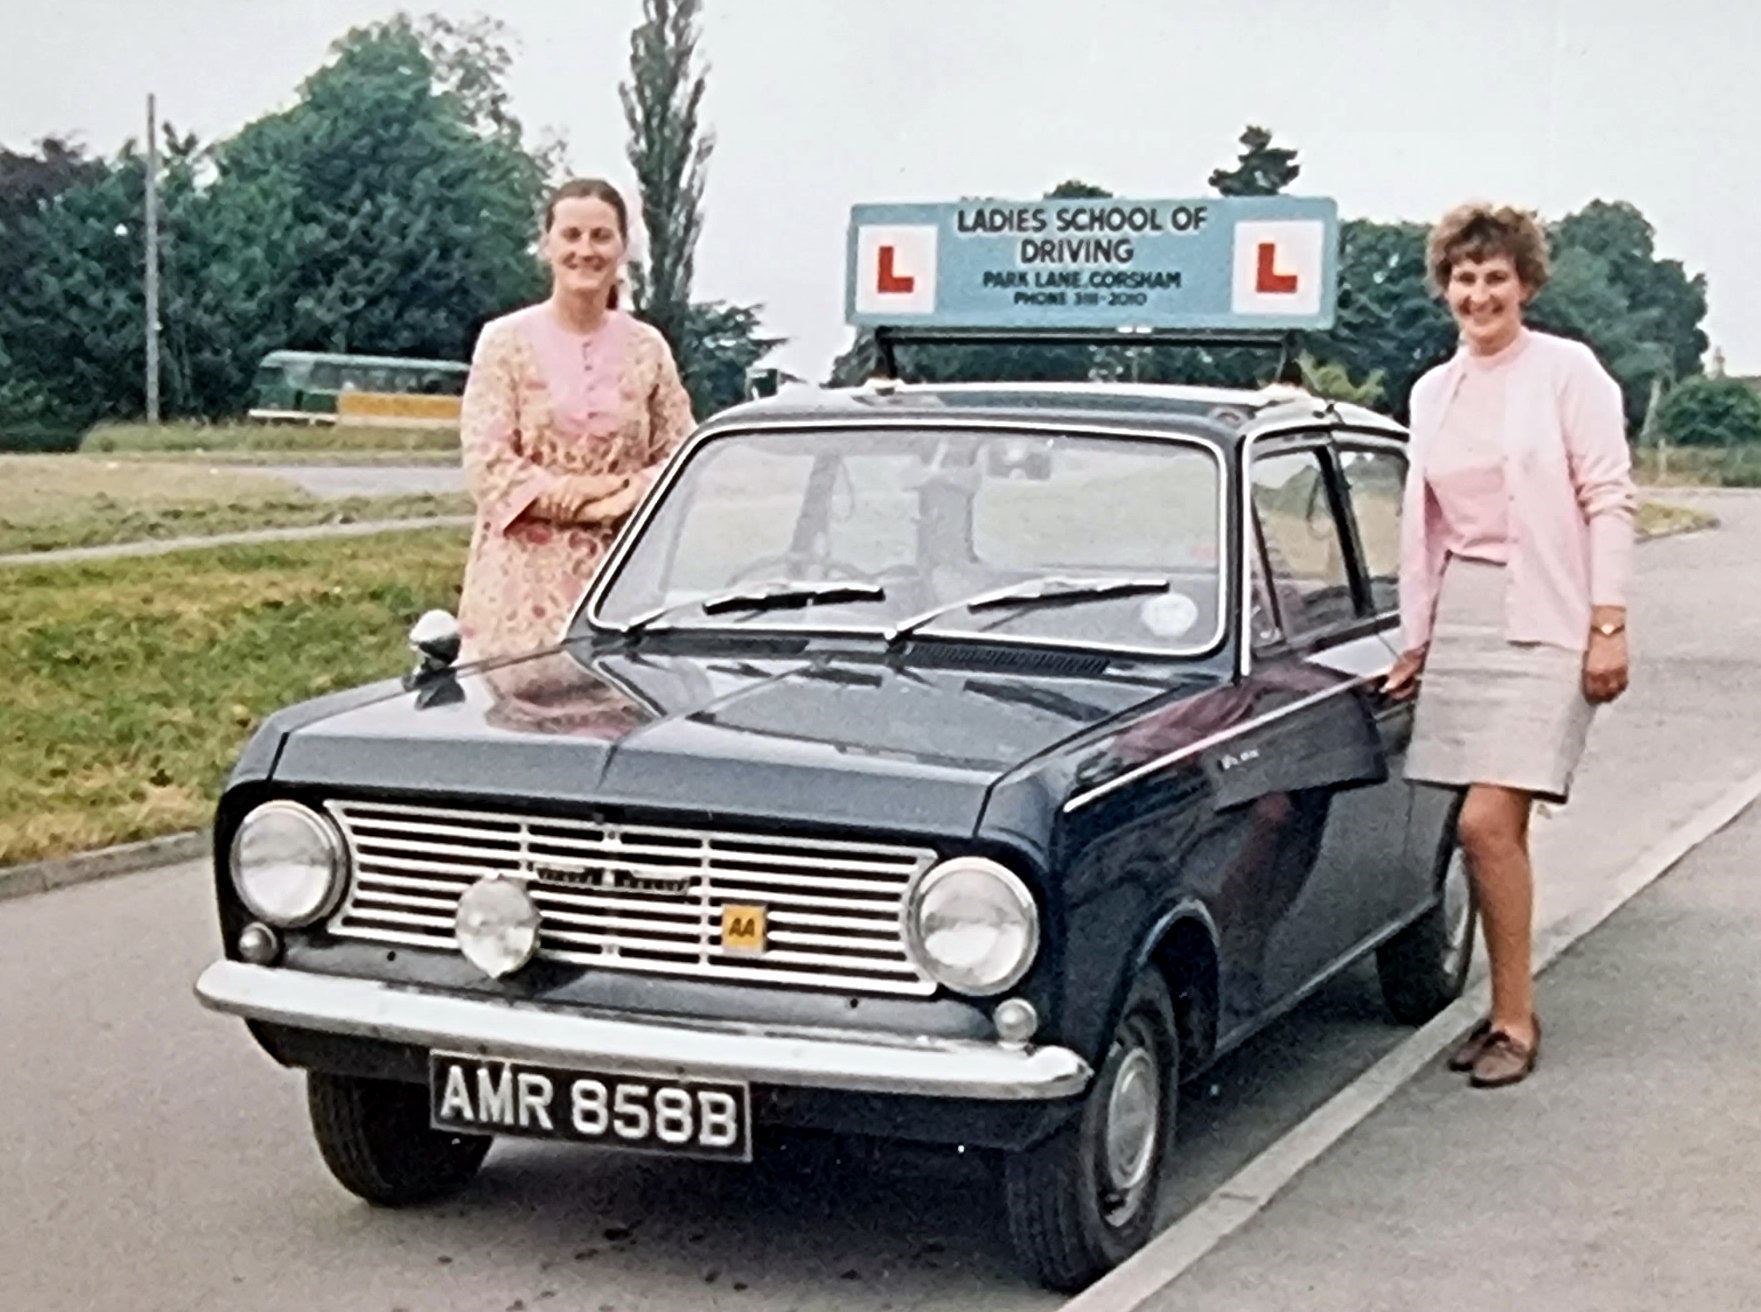 Angela pictured in the 1960s with her female-only driving school, the Uk's first.